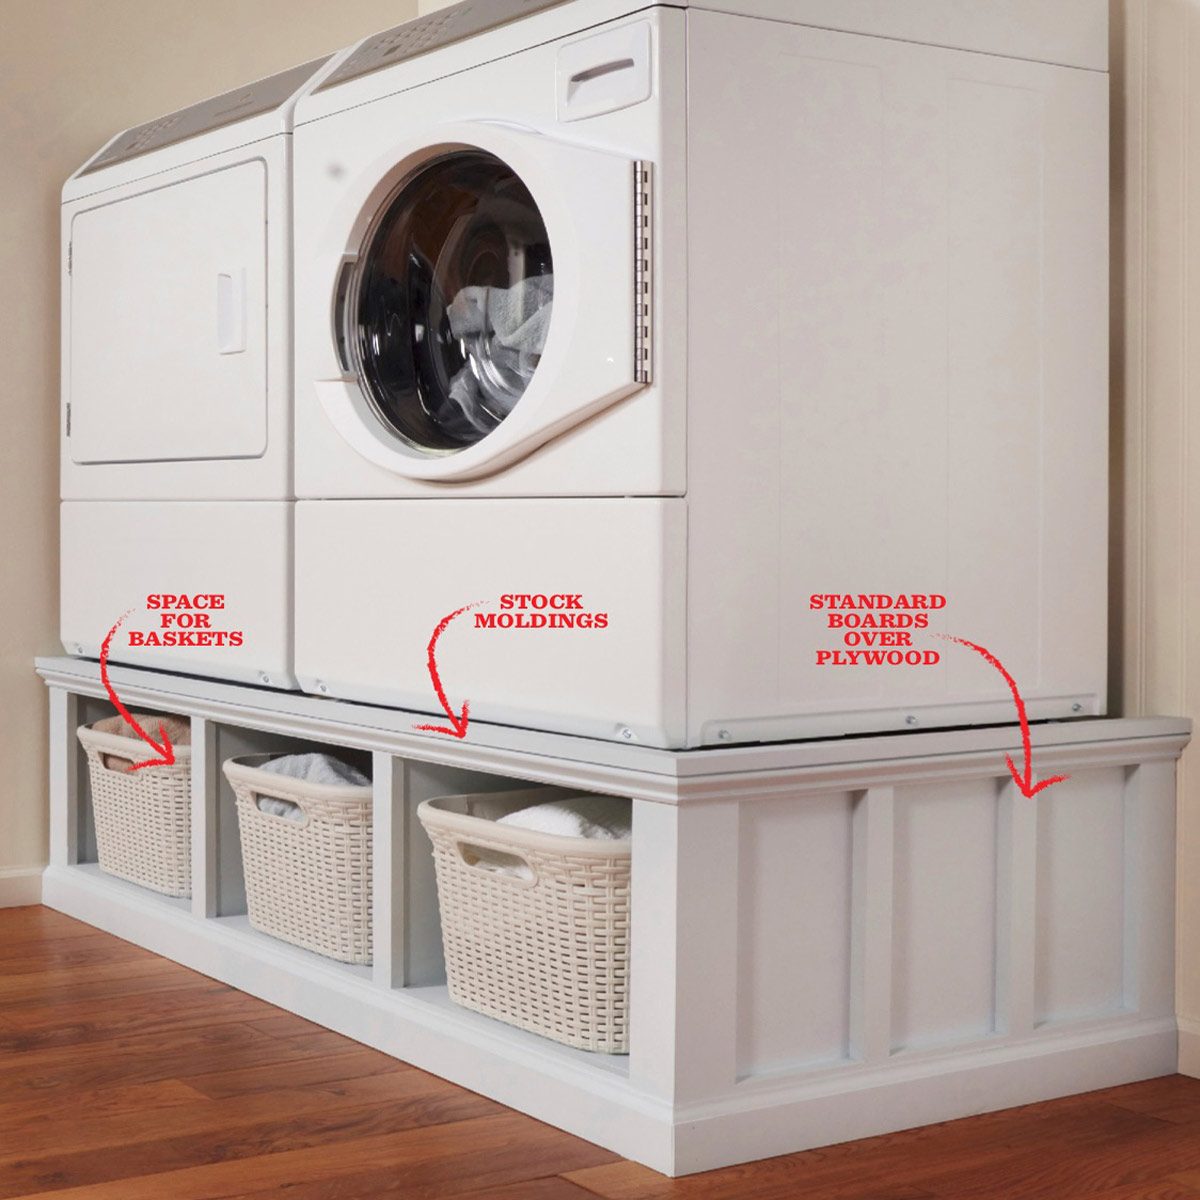 How to Build a Laundry Room Pedestal The Family Handyman